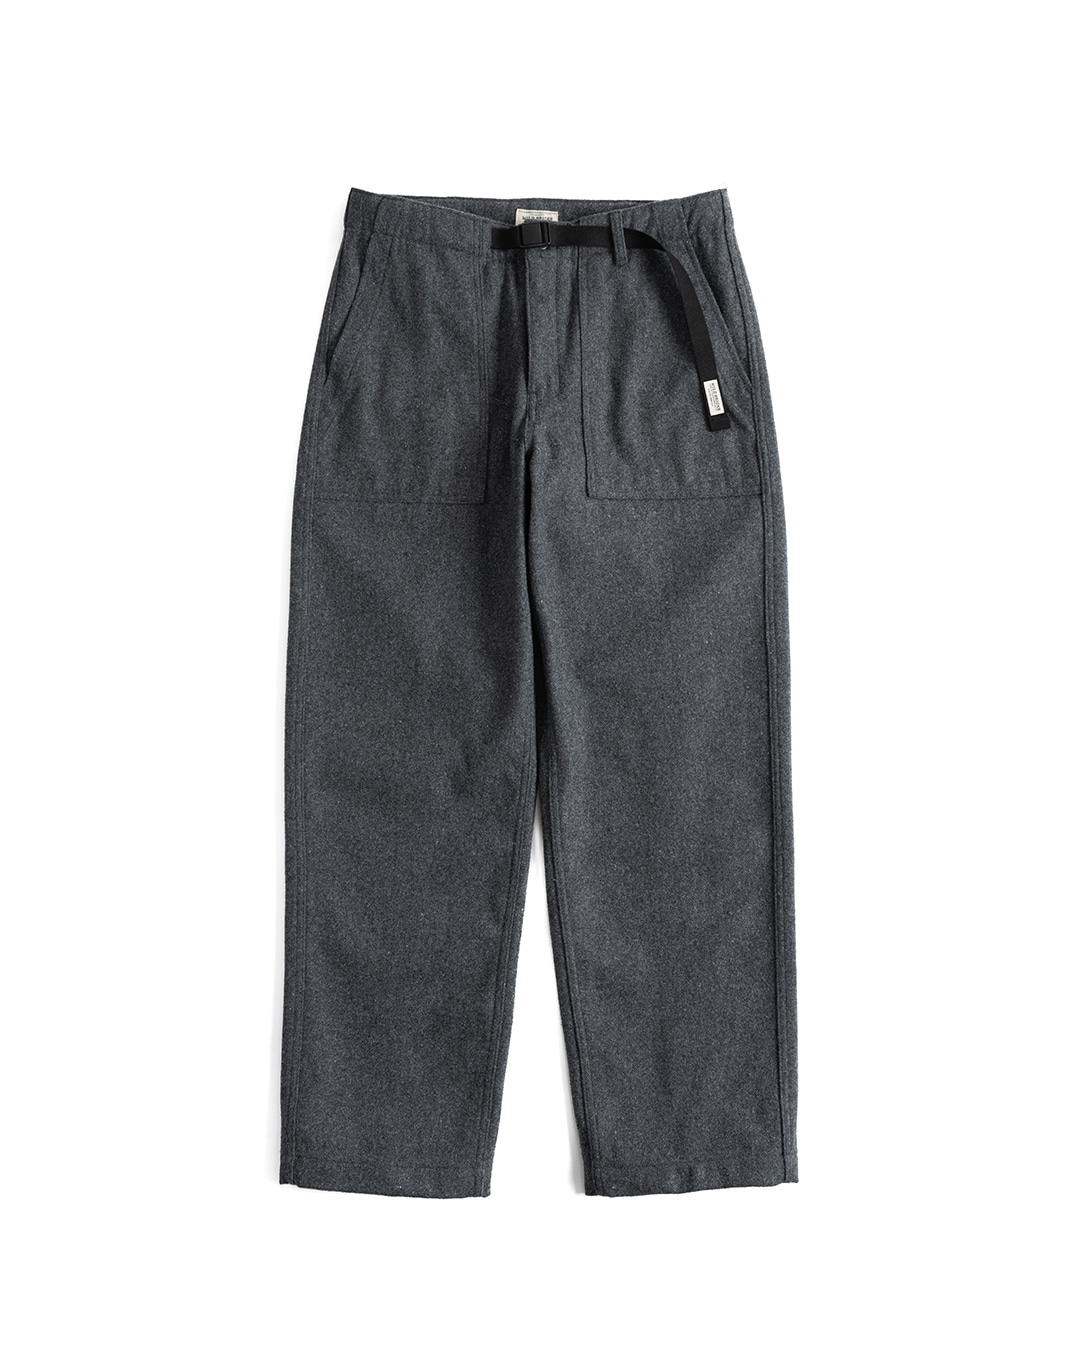 BS BELTED FATIGUE PANTS (grey)